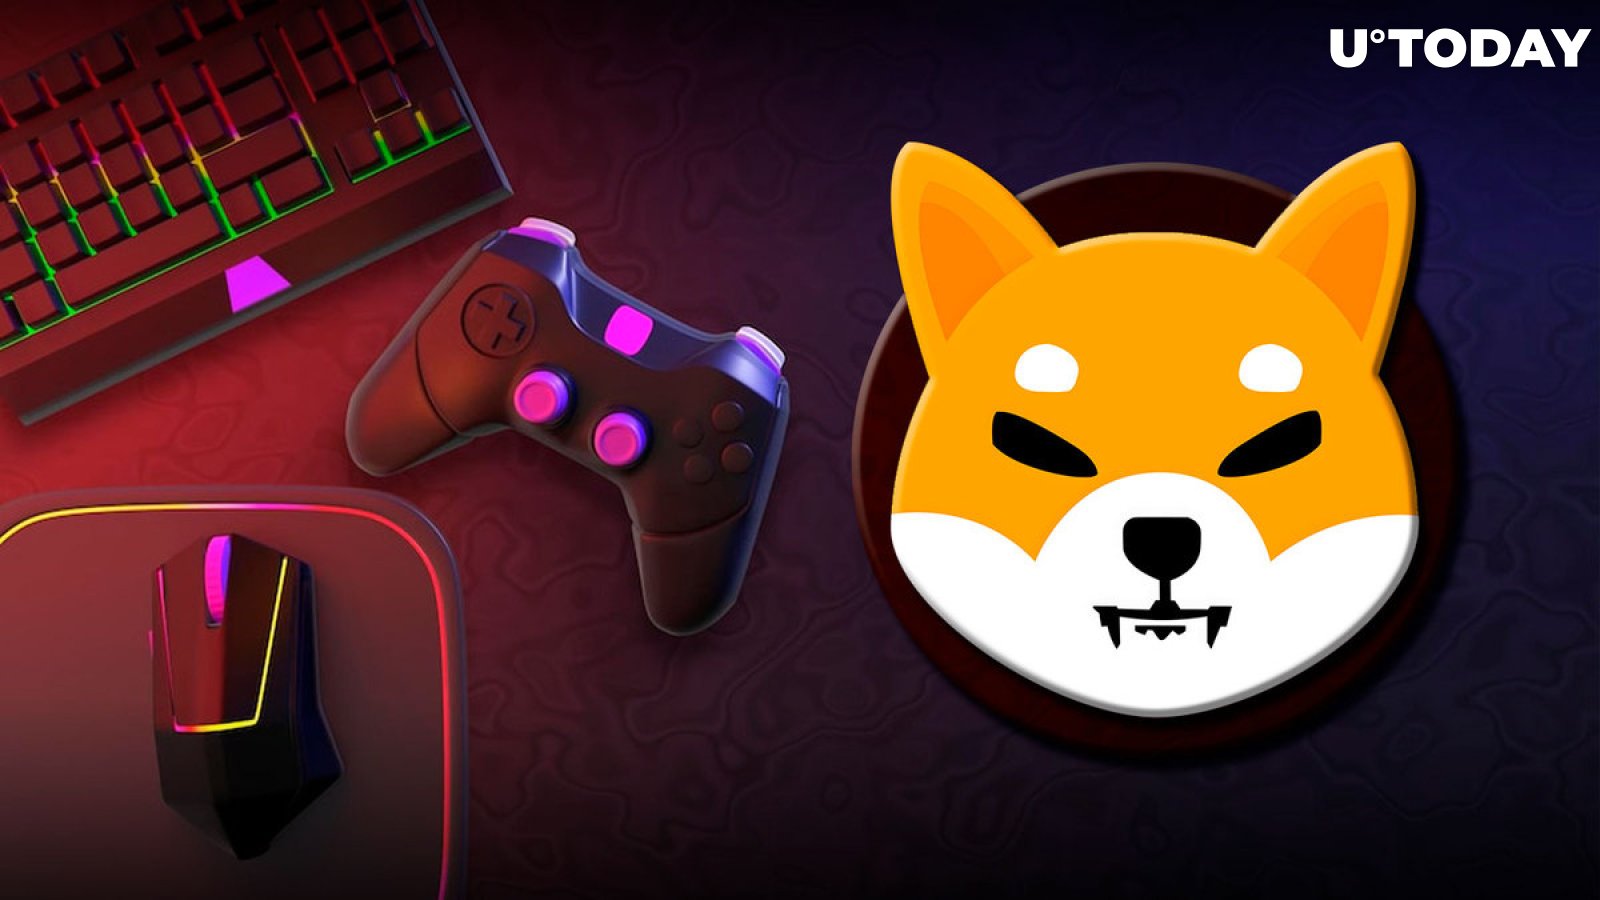 Shiba Inu Developer Shares New Details About Burning SHIB with Profits from Game